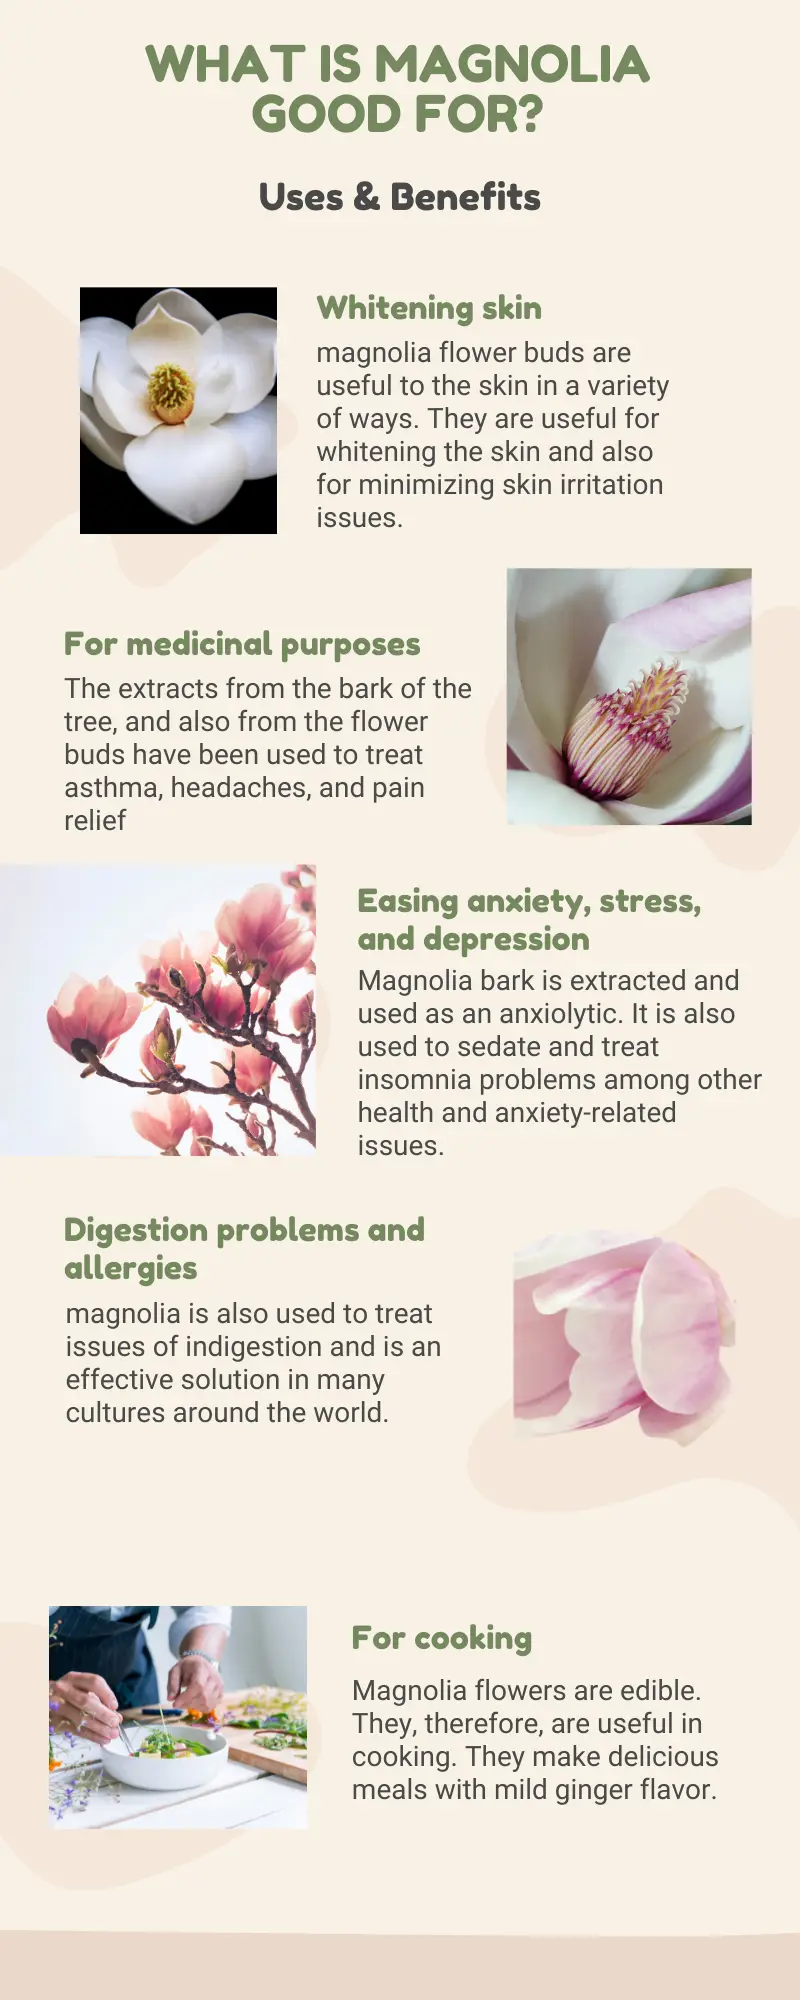 What is Magnolia used for? Medicinal uses